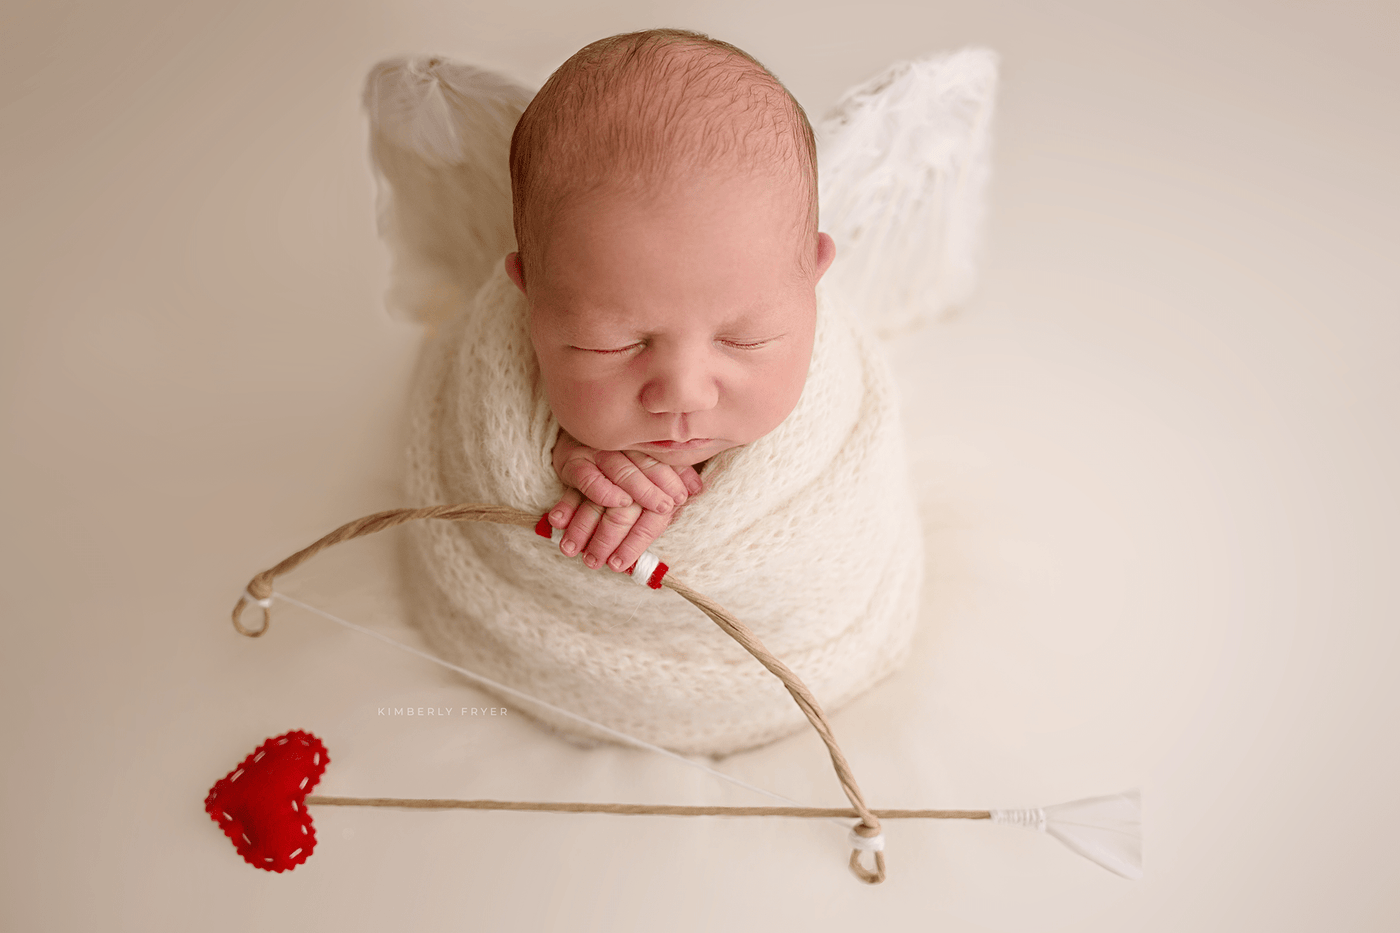 White Feather Puff Angel Wings Newborn Baby Toddler Photo Prop - Beautiful Photo Props